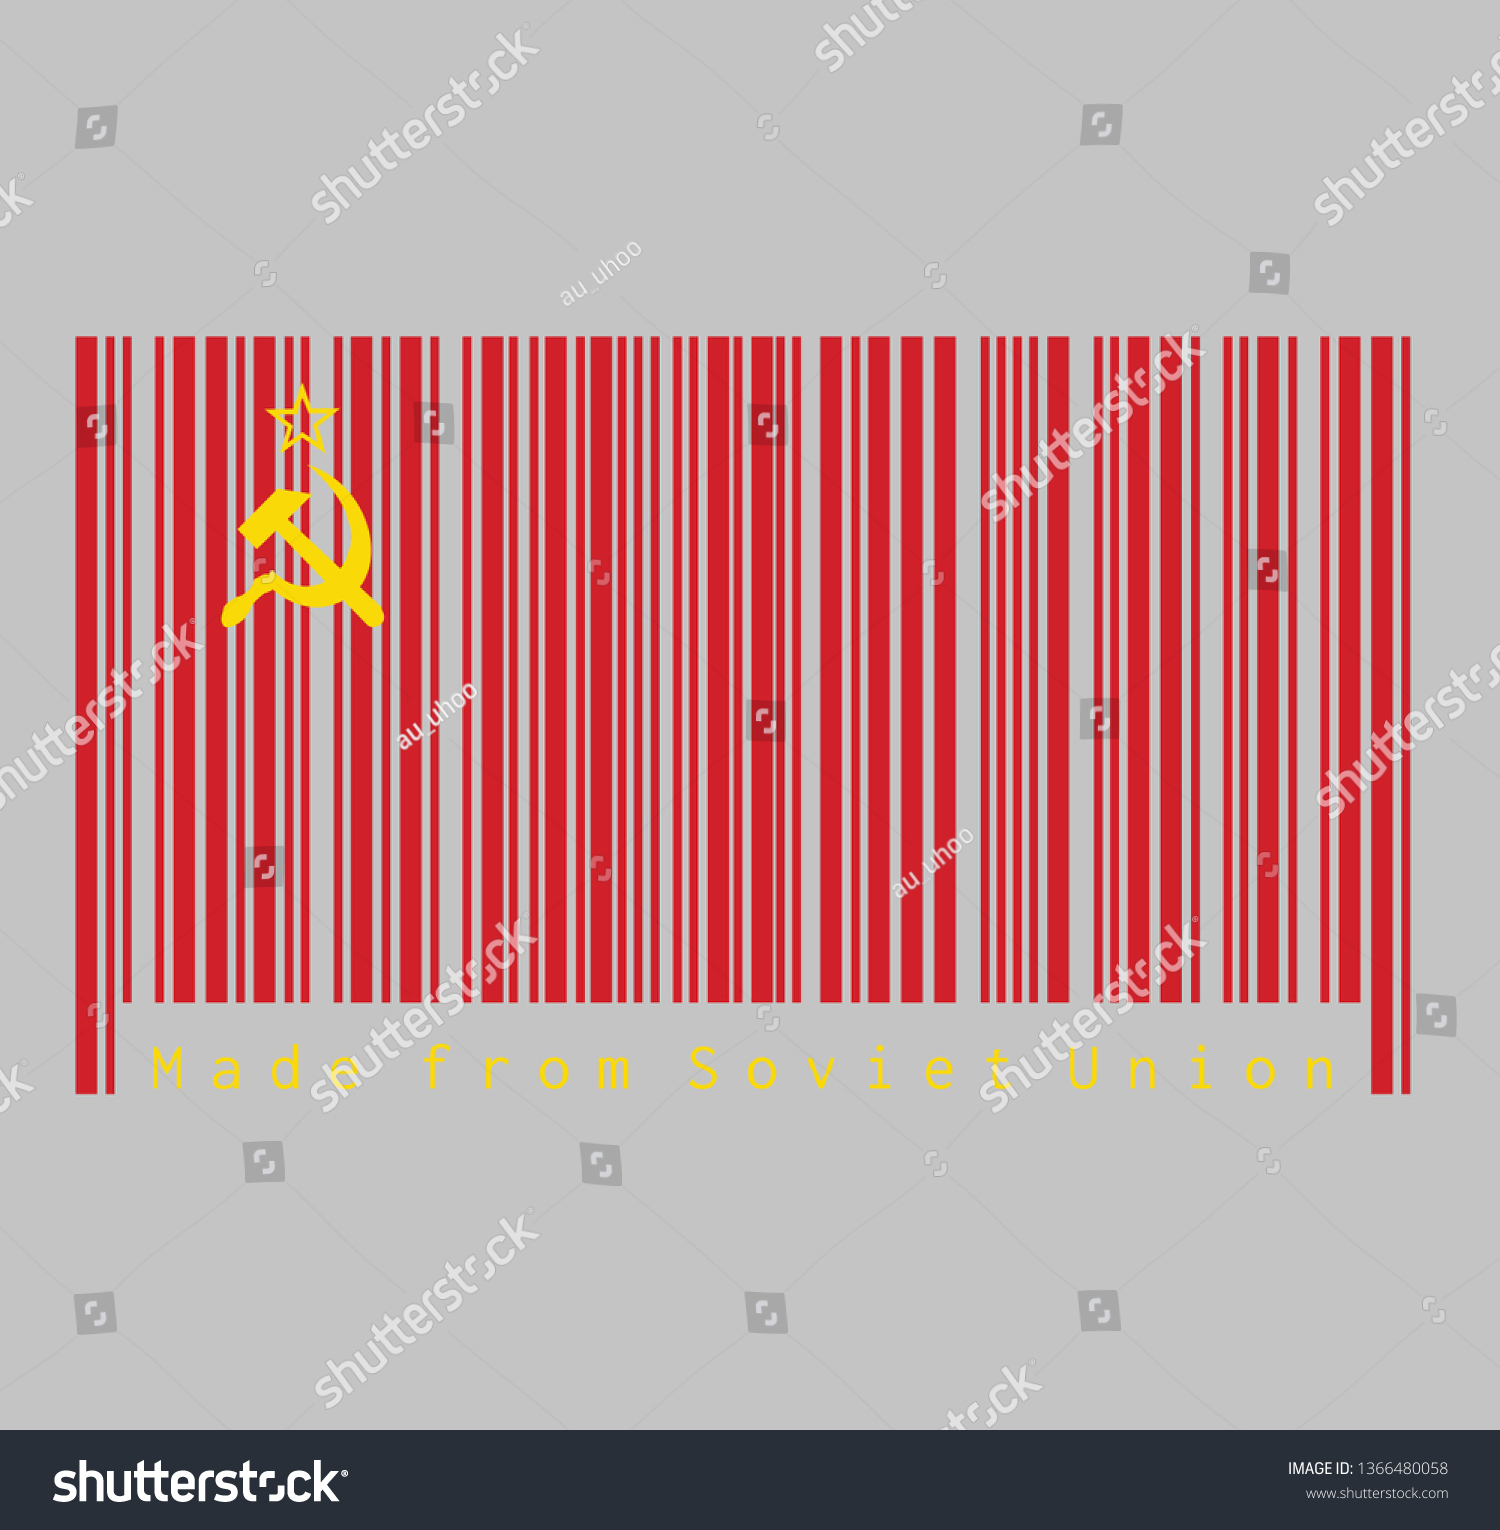 Barcode Set Color Soviet Union Flag Stock Vector Royalty Free 1366480058,Kids Room Bedroom Ideas For Girls Age 10